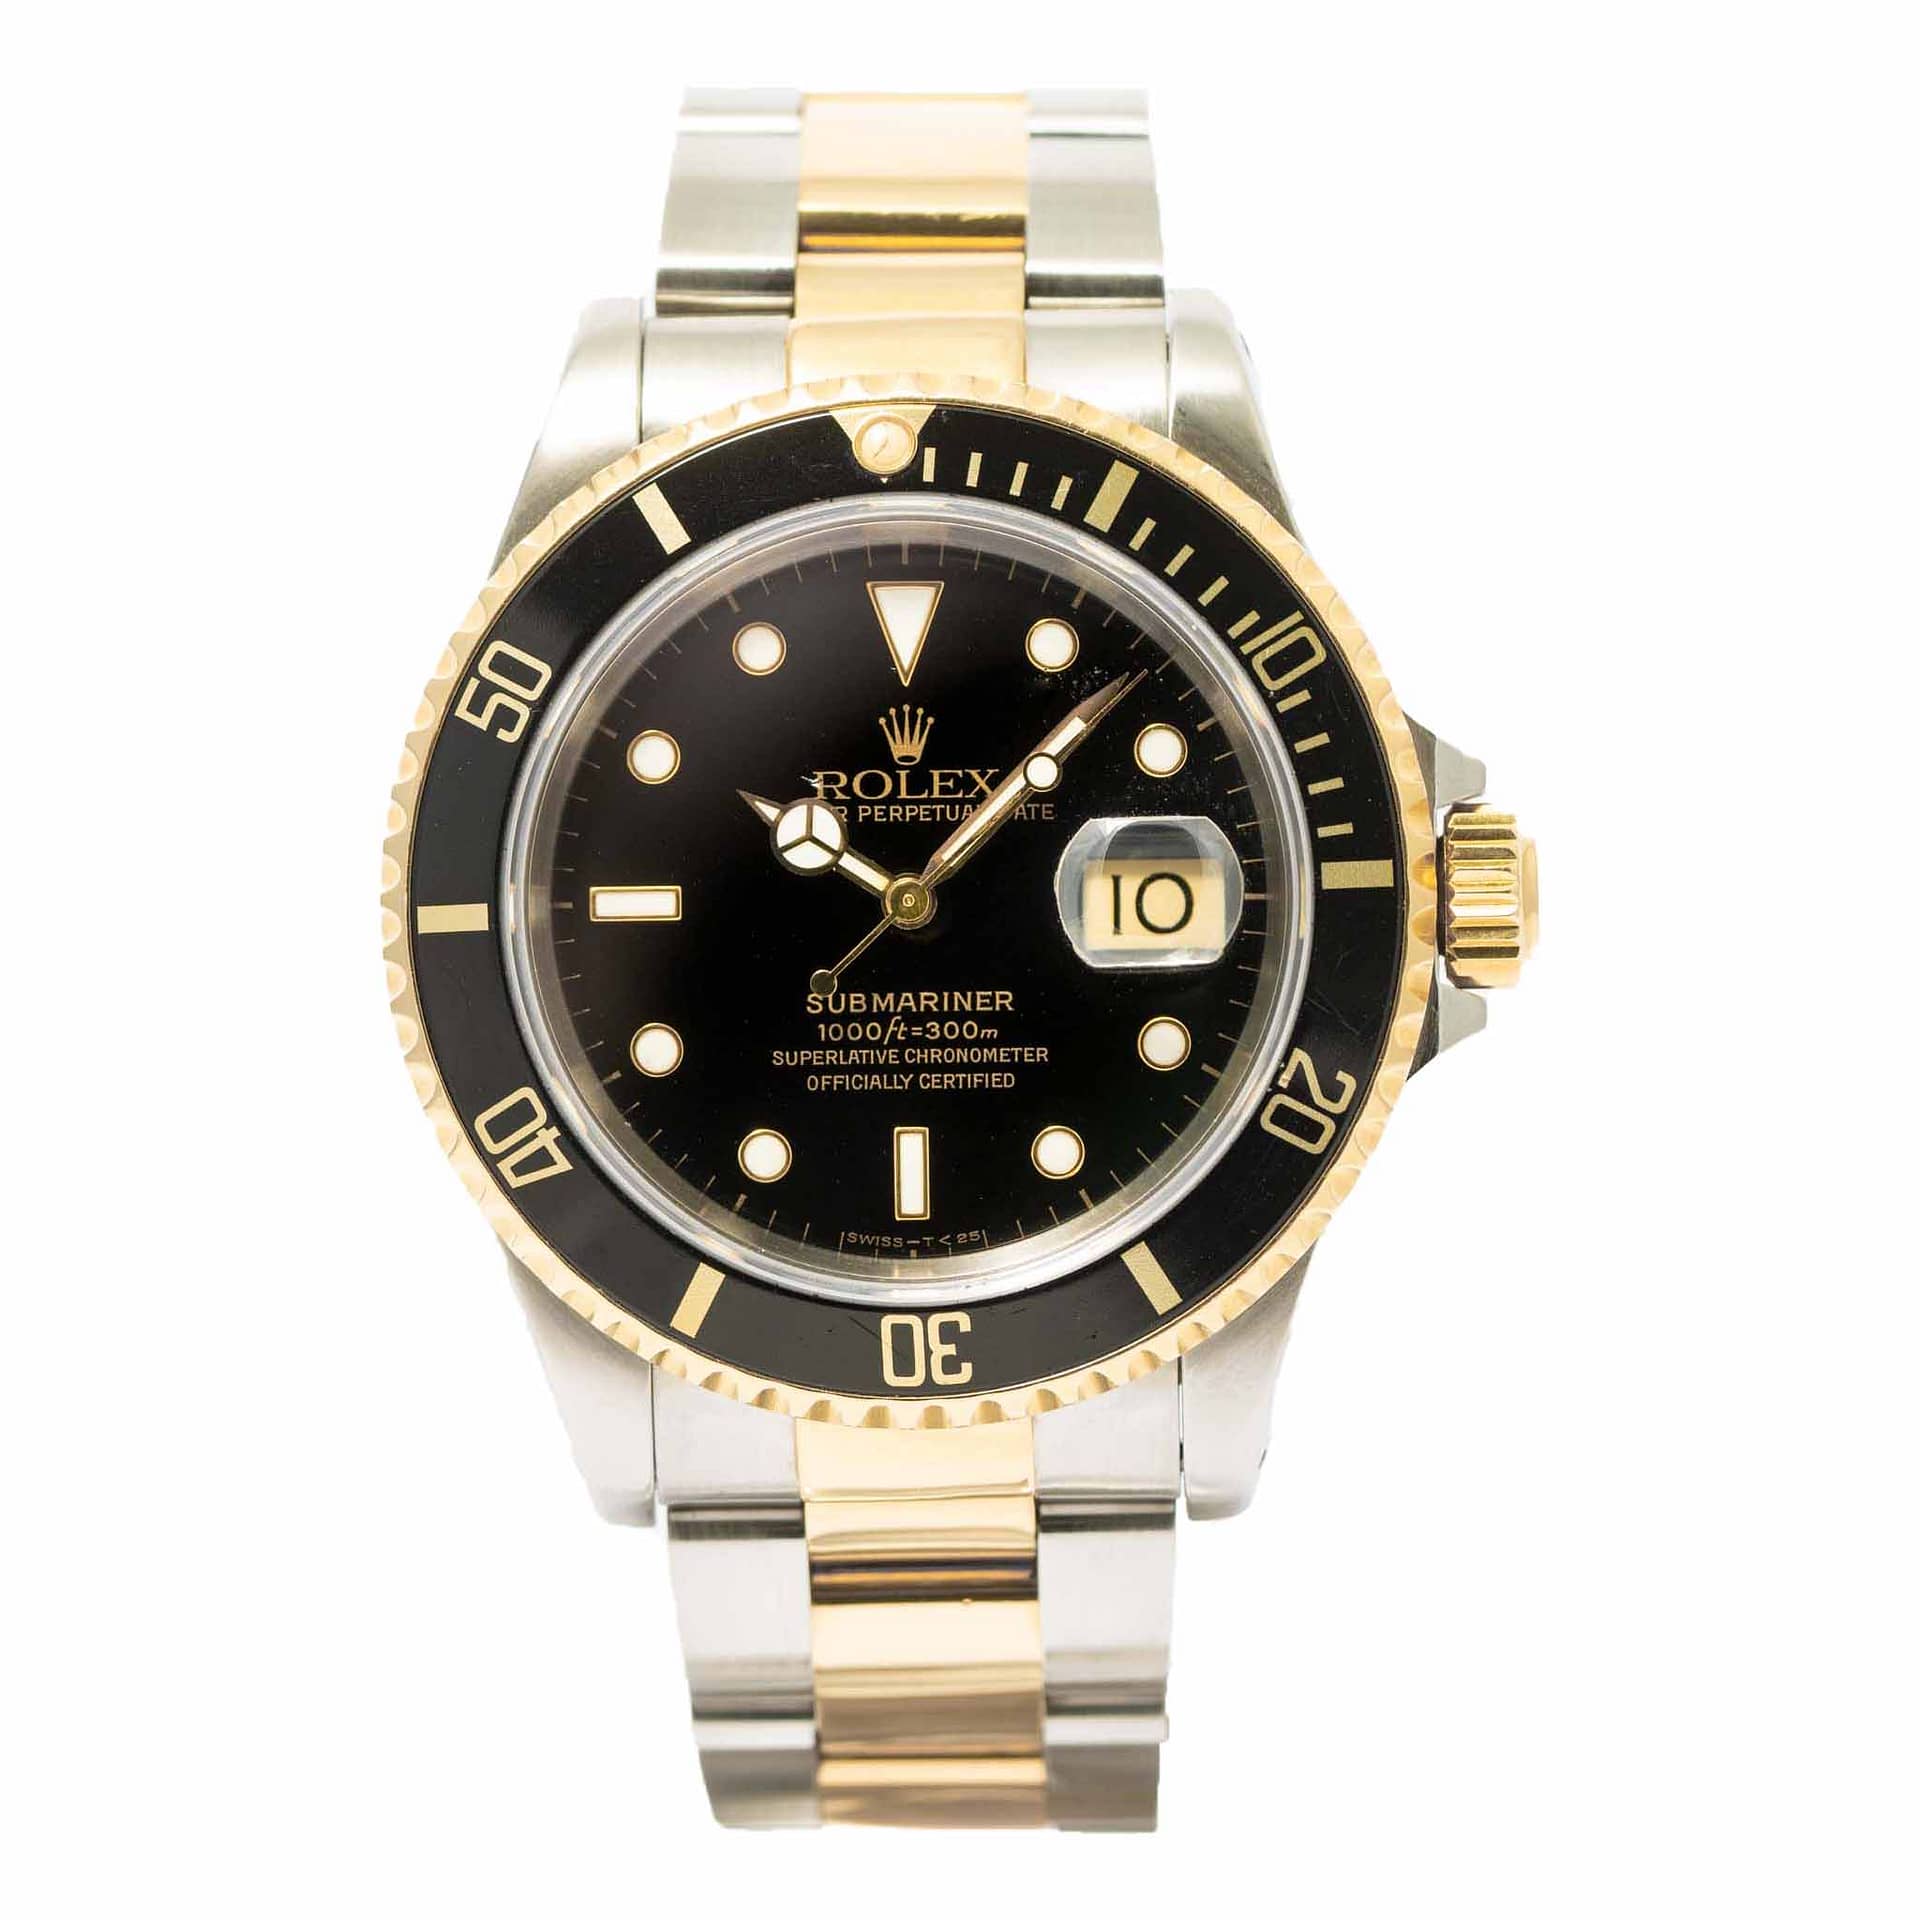 Rolex Submariner Two-Tone Yellow Gold and Stainless Steel 40mm (16613) — Shreve, Crump Low